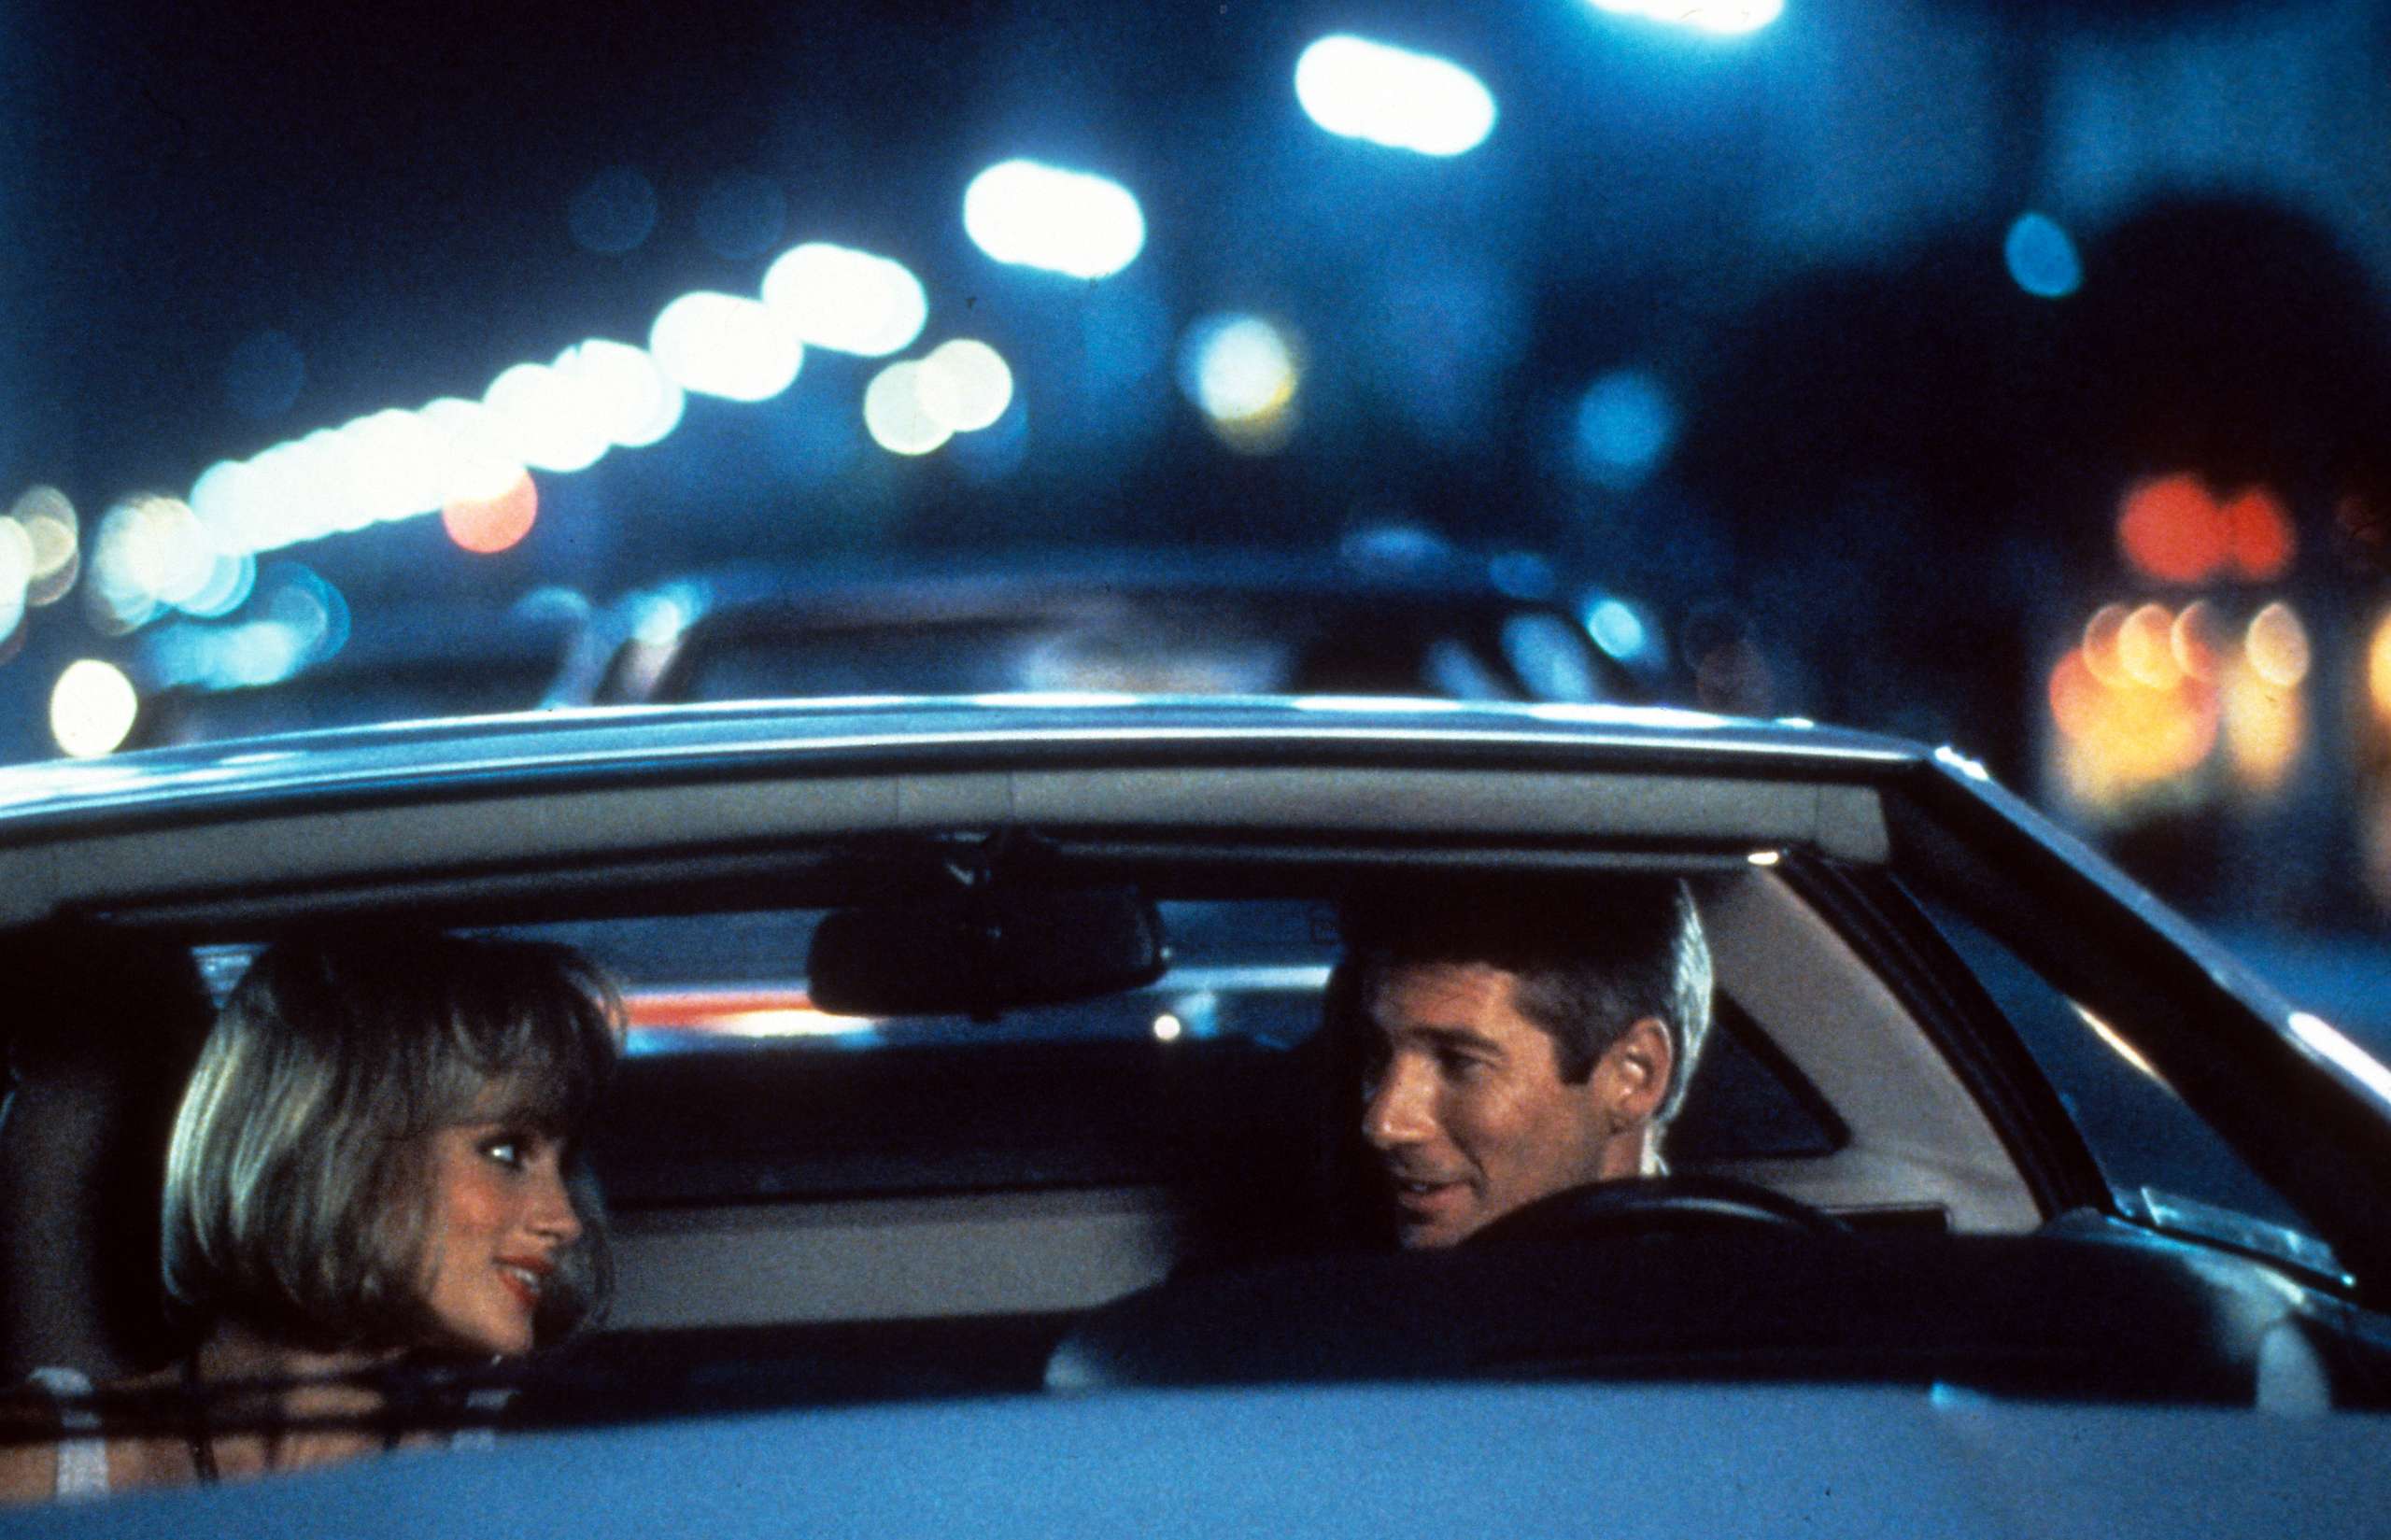 Julia Roberts rides with Richard Gere in a scene from the film 'Pretty Woman', 1990. (Photo by Buena Vista/Getty Images)